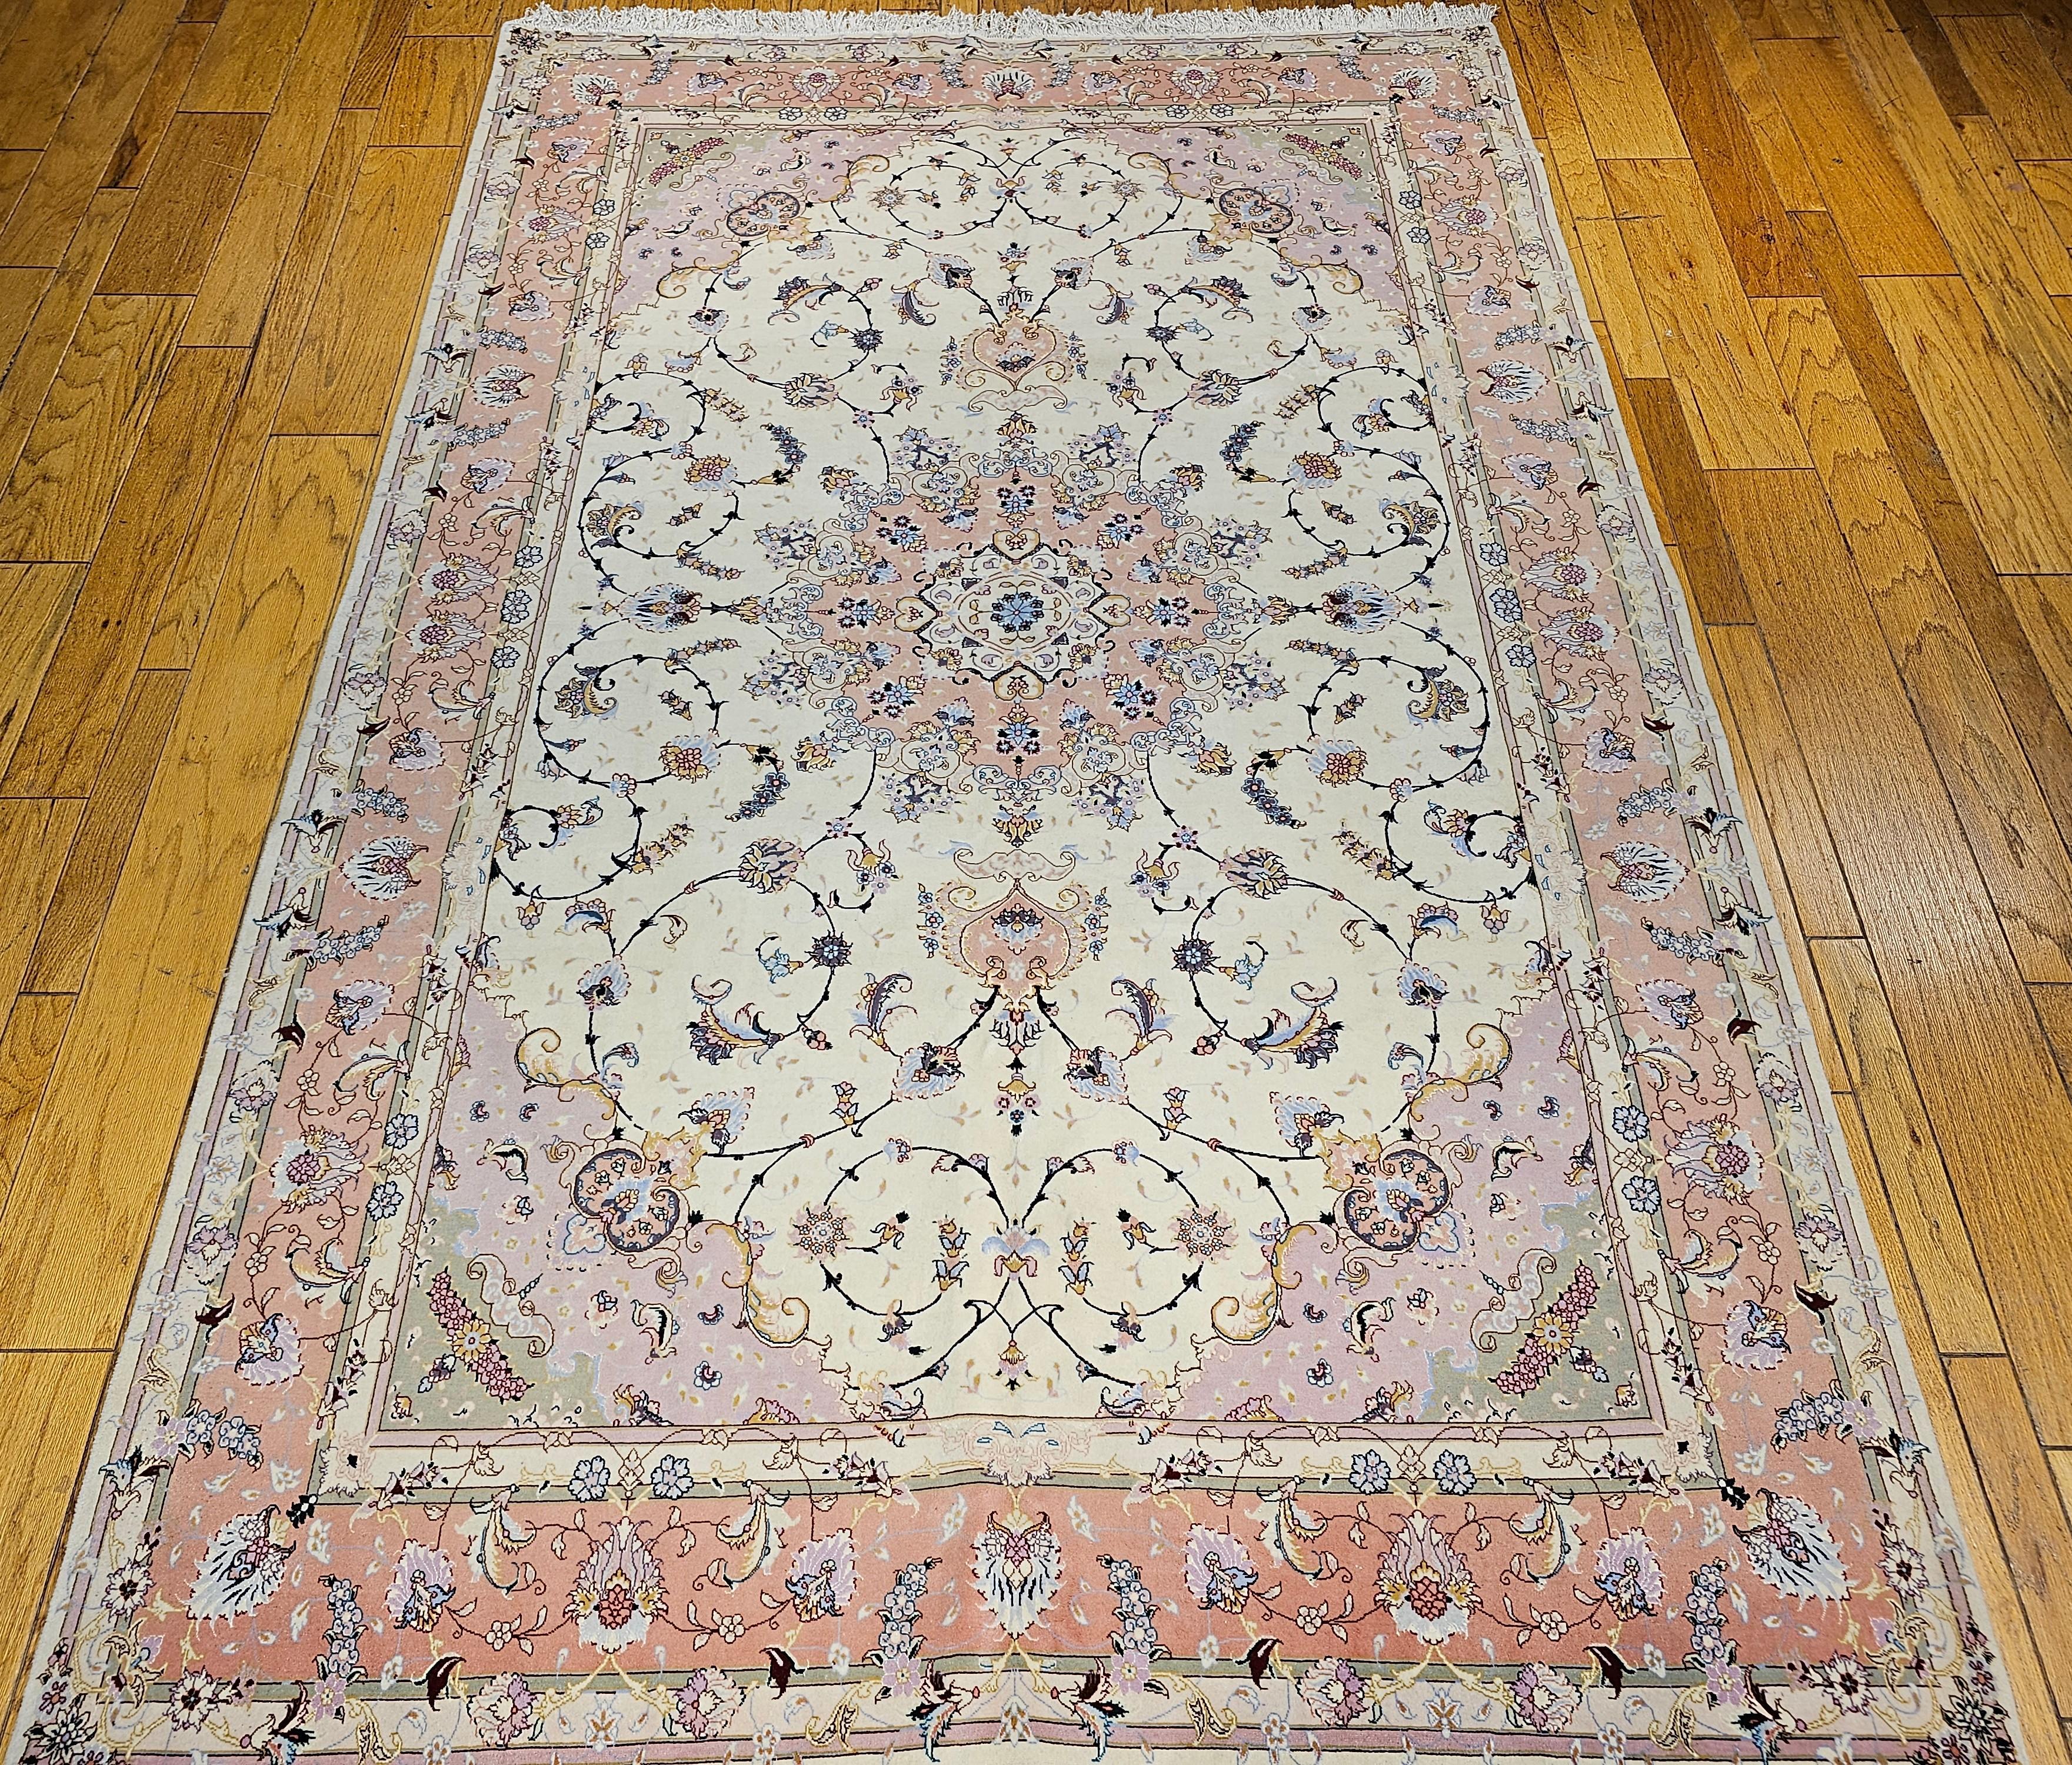 Fine Persian Tabriz in a floral pattern in a cream color background and a pale pink border.  It is artistically woven with a wool pile on a cotton foundation with silk highlighting the designs in a fine workshop in the city of Tabriz in NW Persia. 